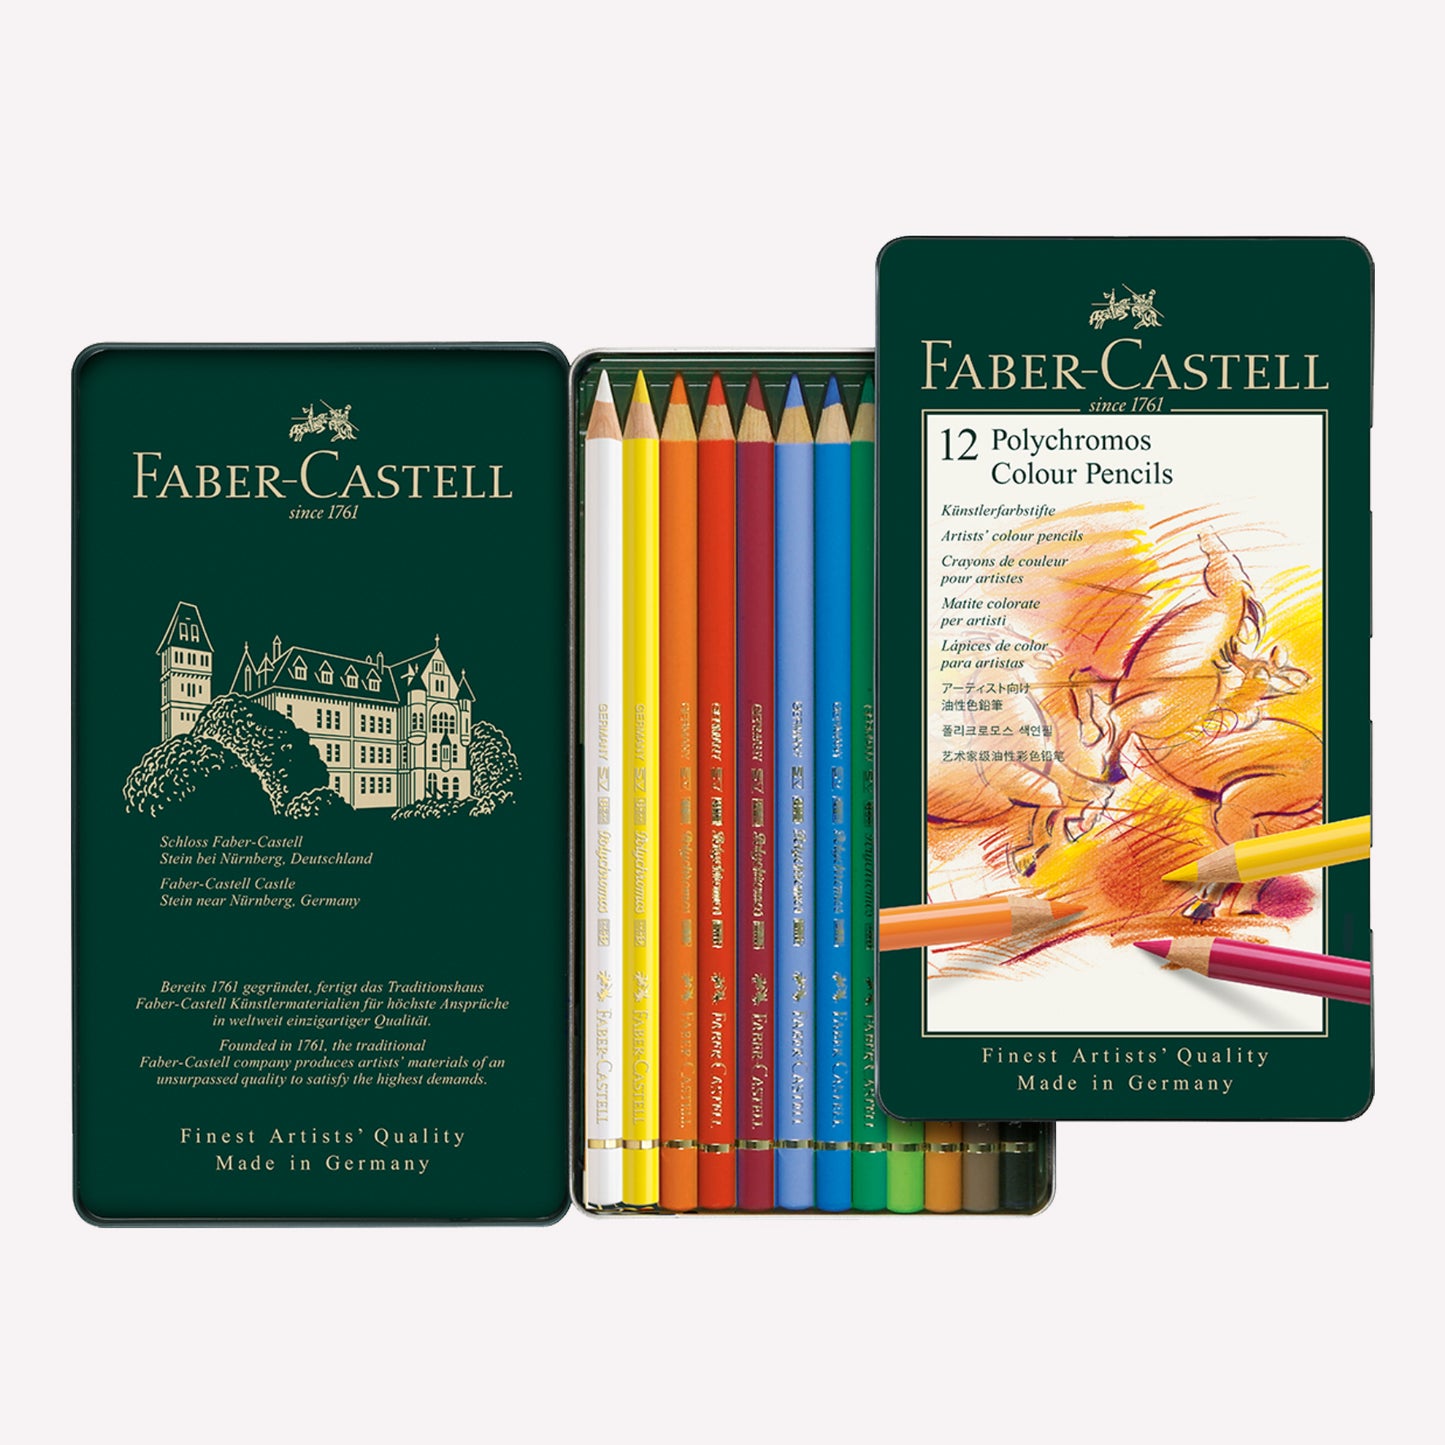 Inside Faber-Castell's Polychromos set of 12 colour pencils packaged in a green metal tin with an expressive illustration of a horse on the front. 